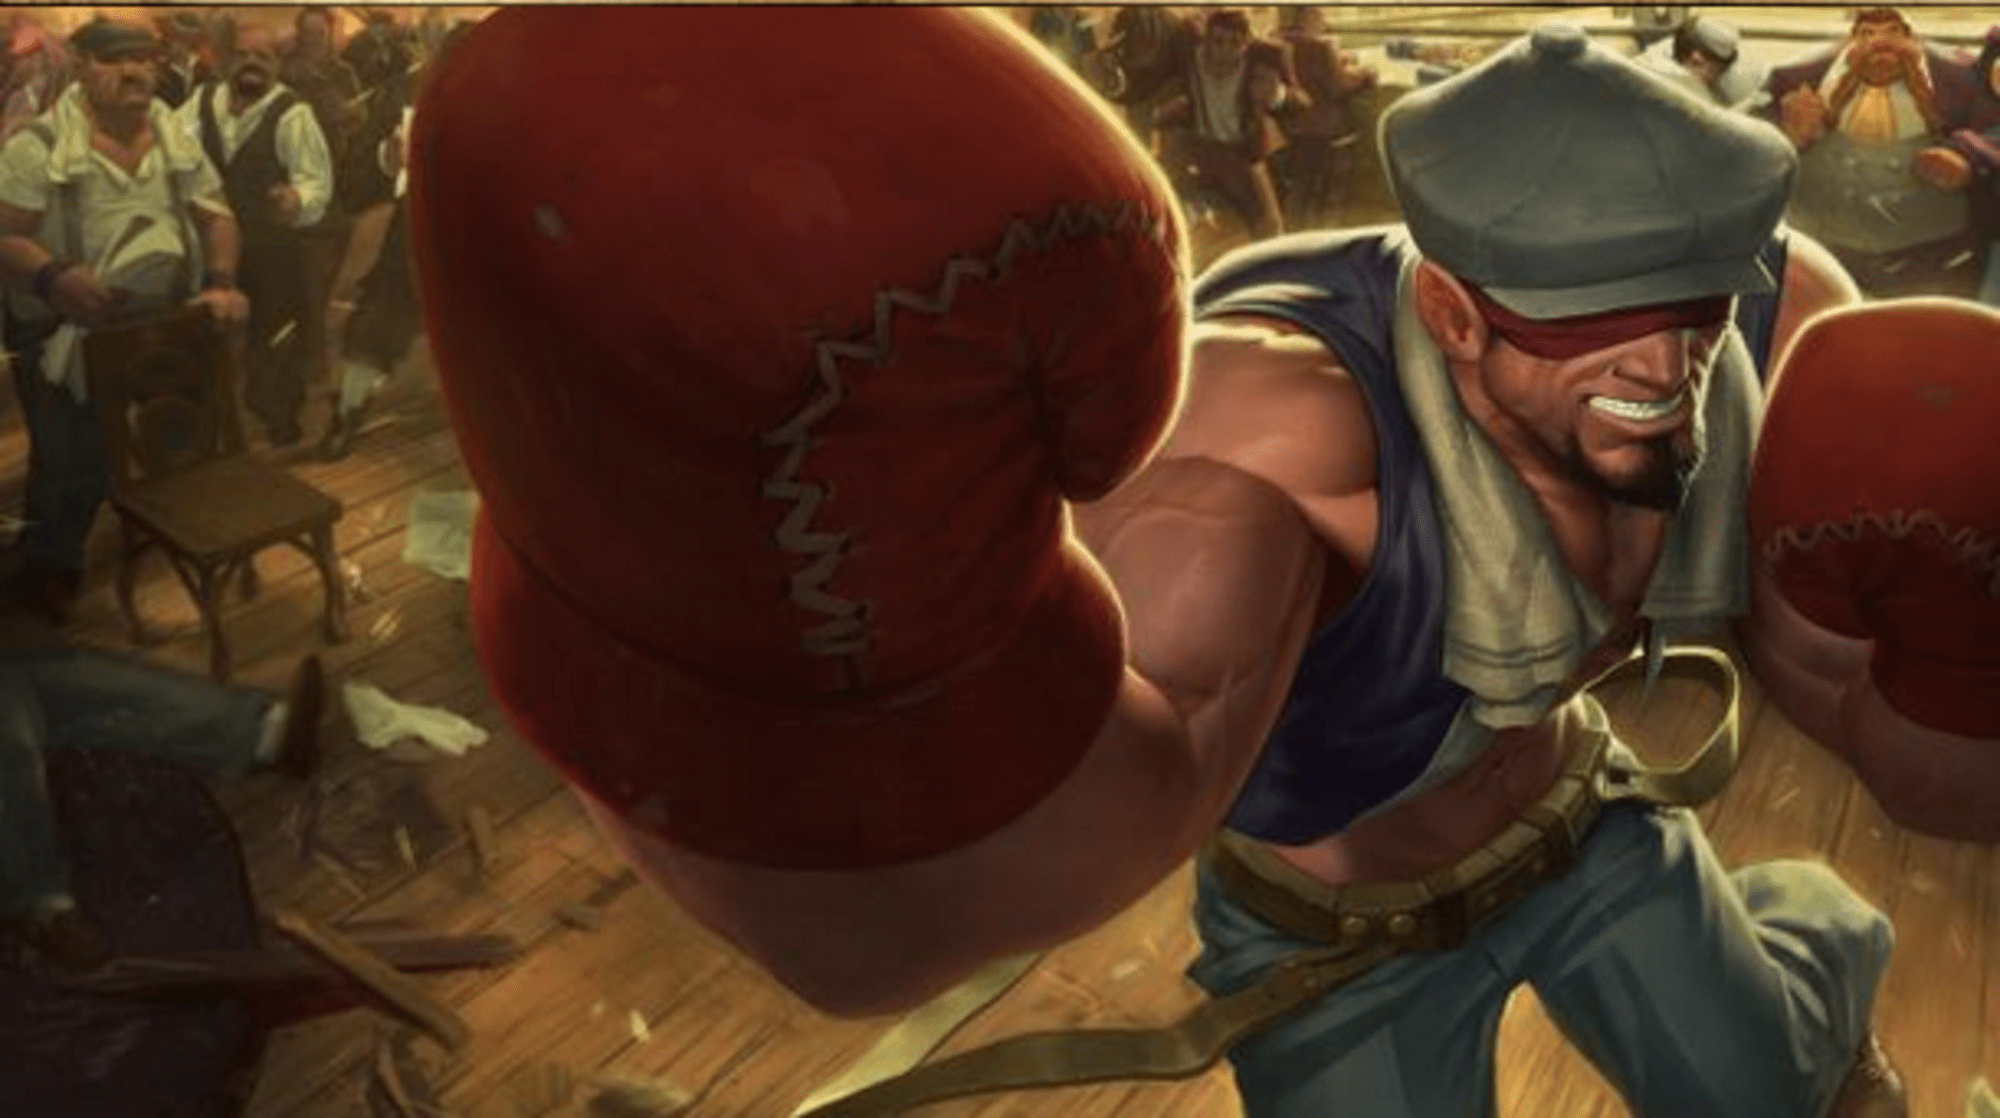 New Lee Sin skin is a real knockout!